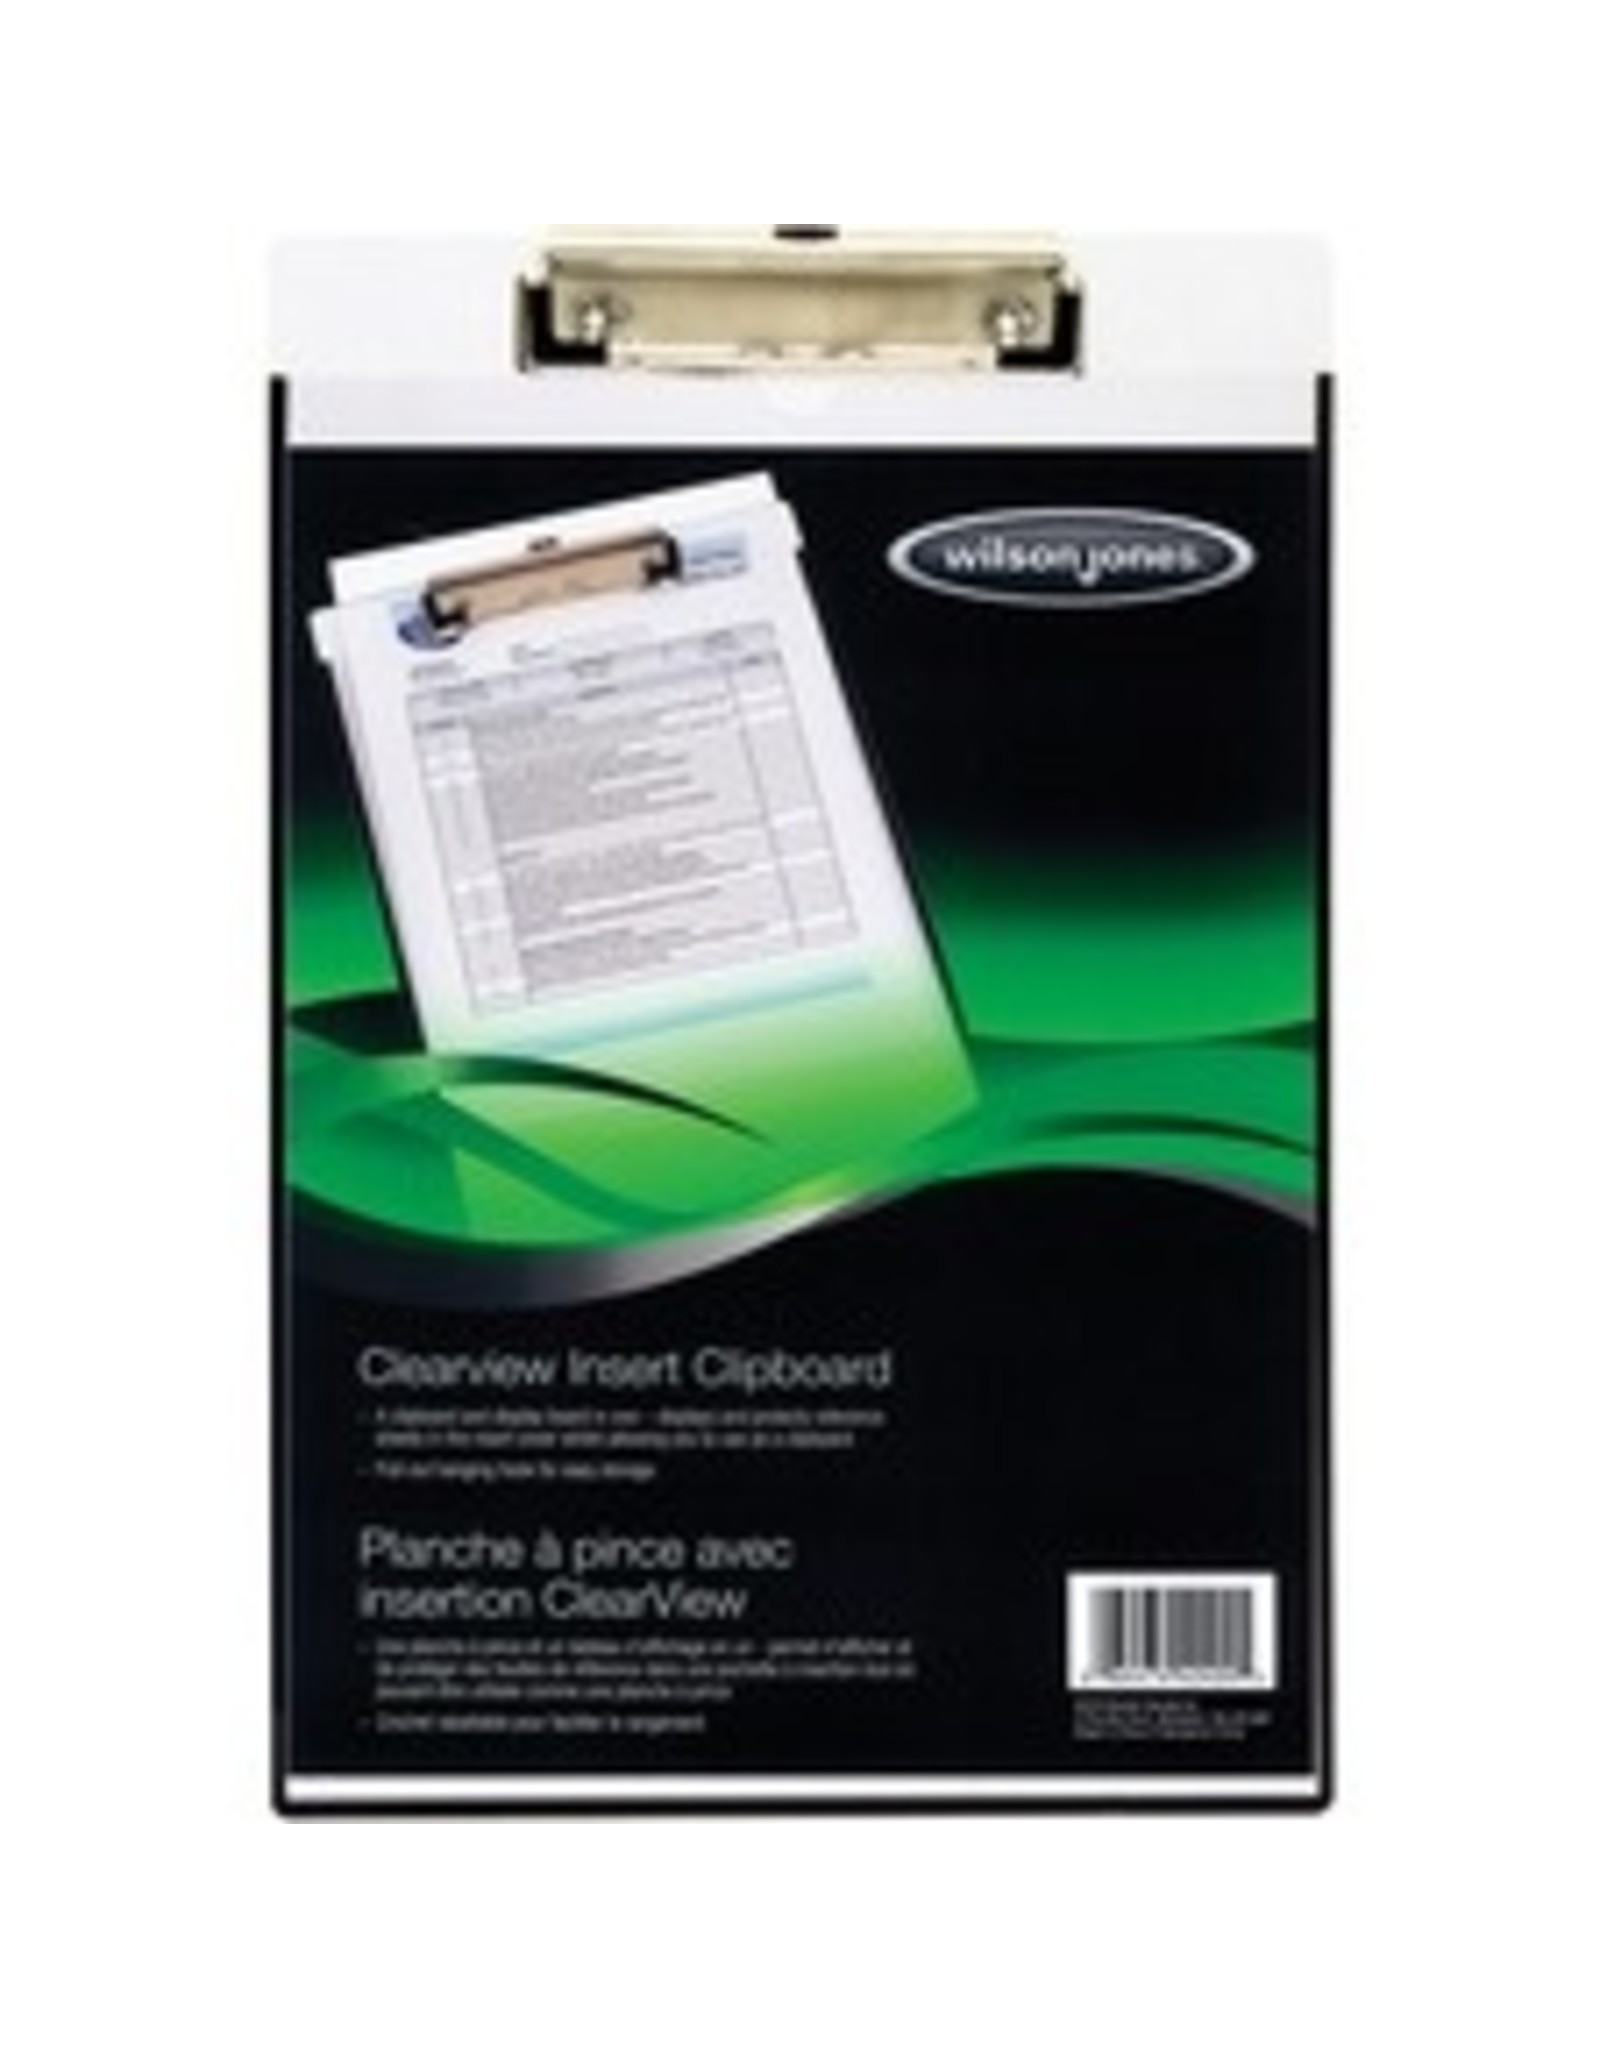 CLIPBOARD CLEARVIEW INSERT